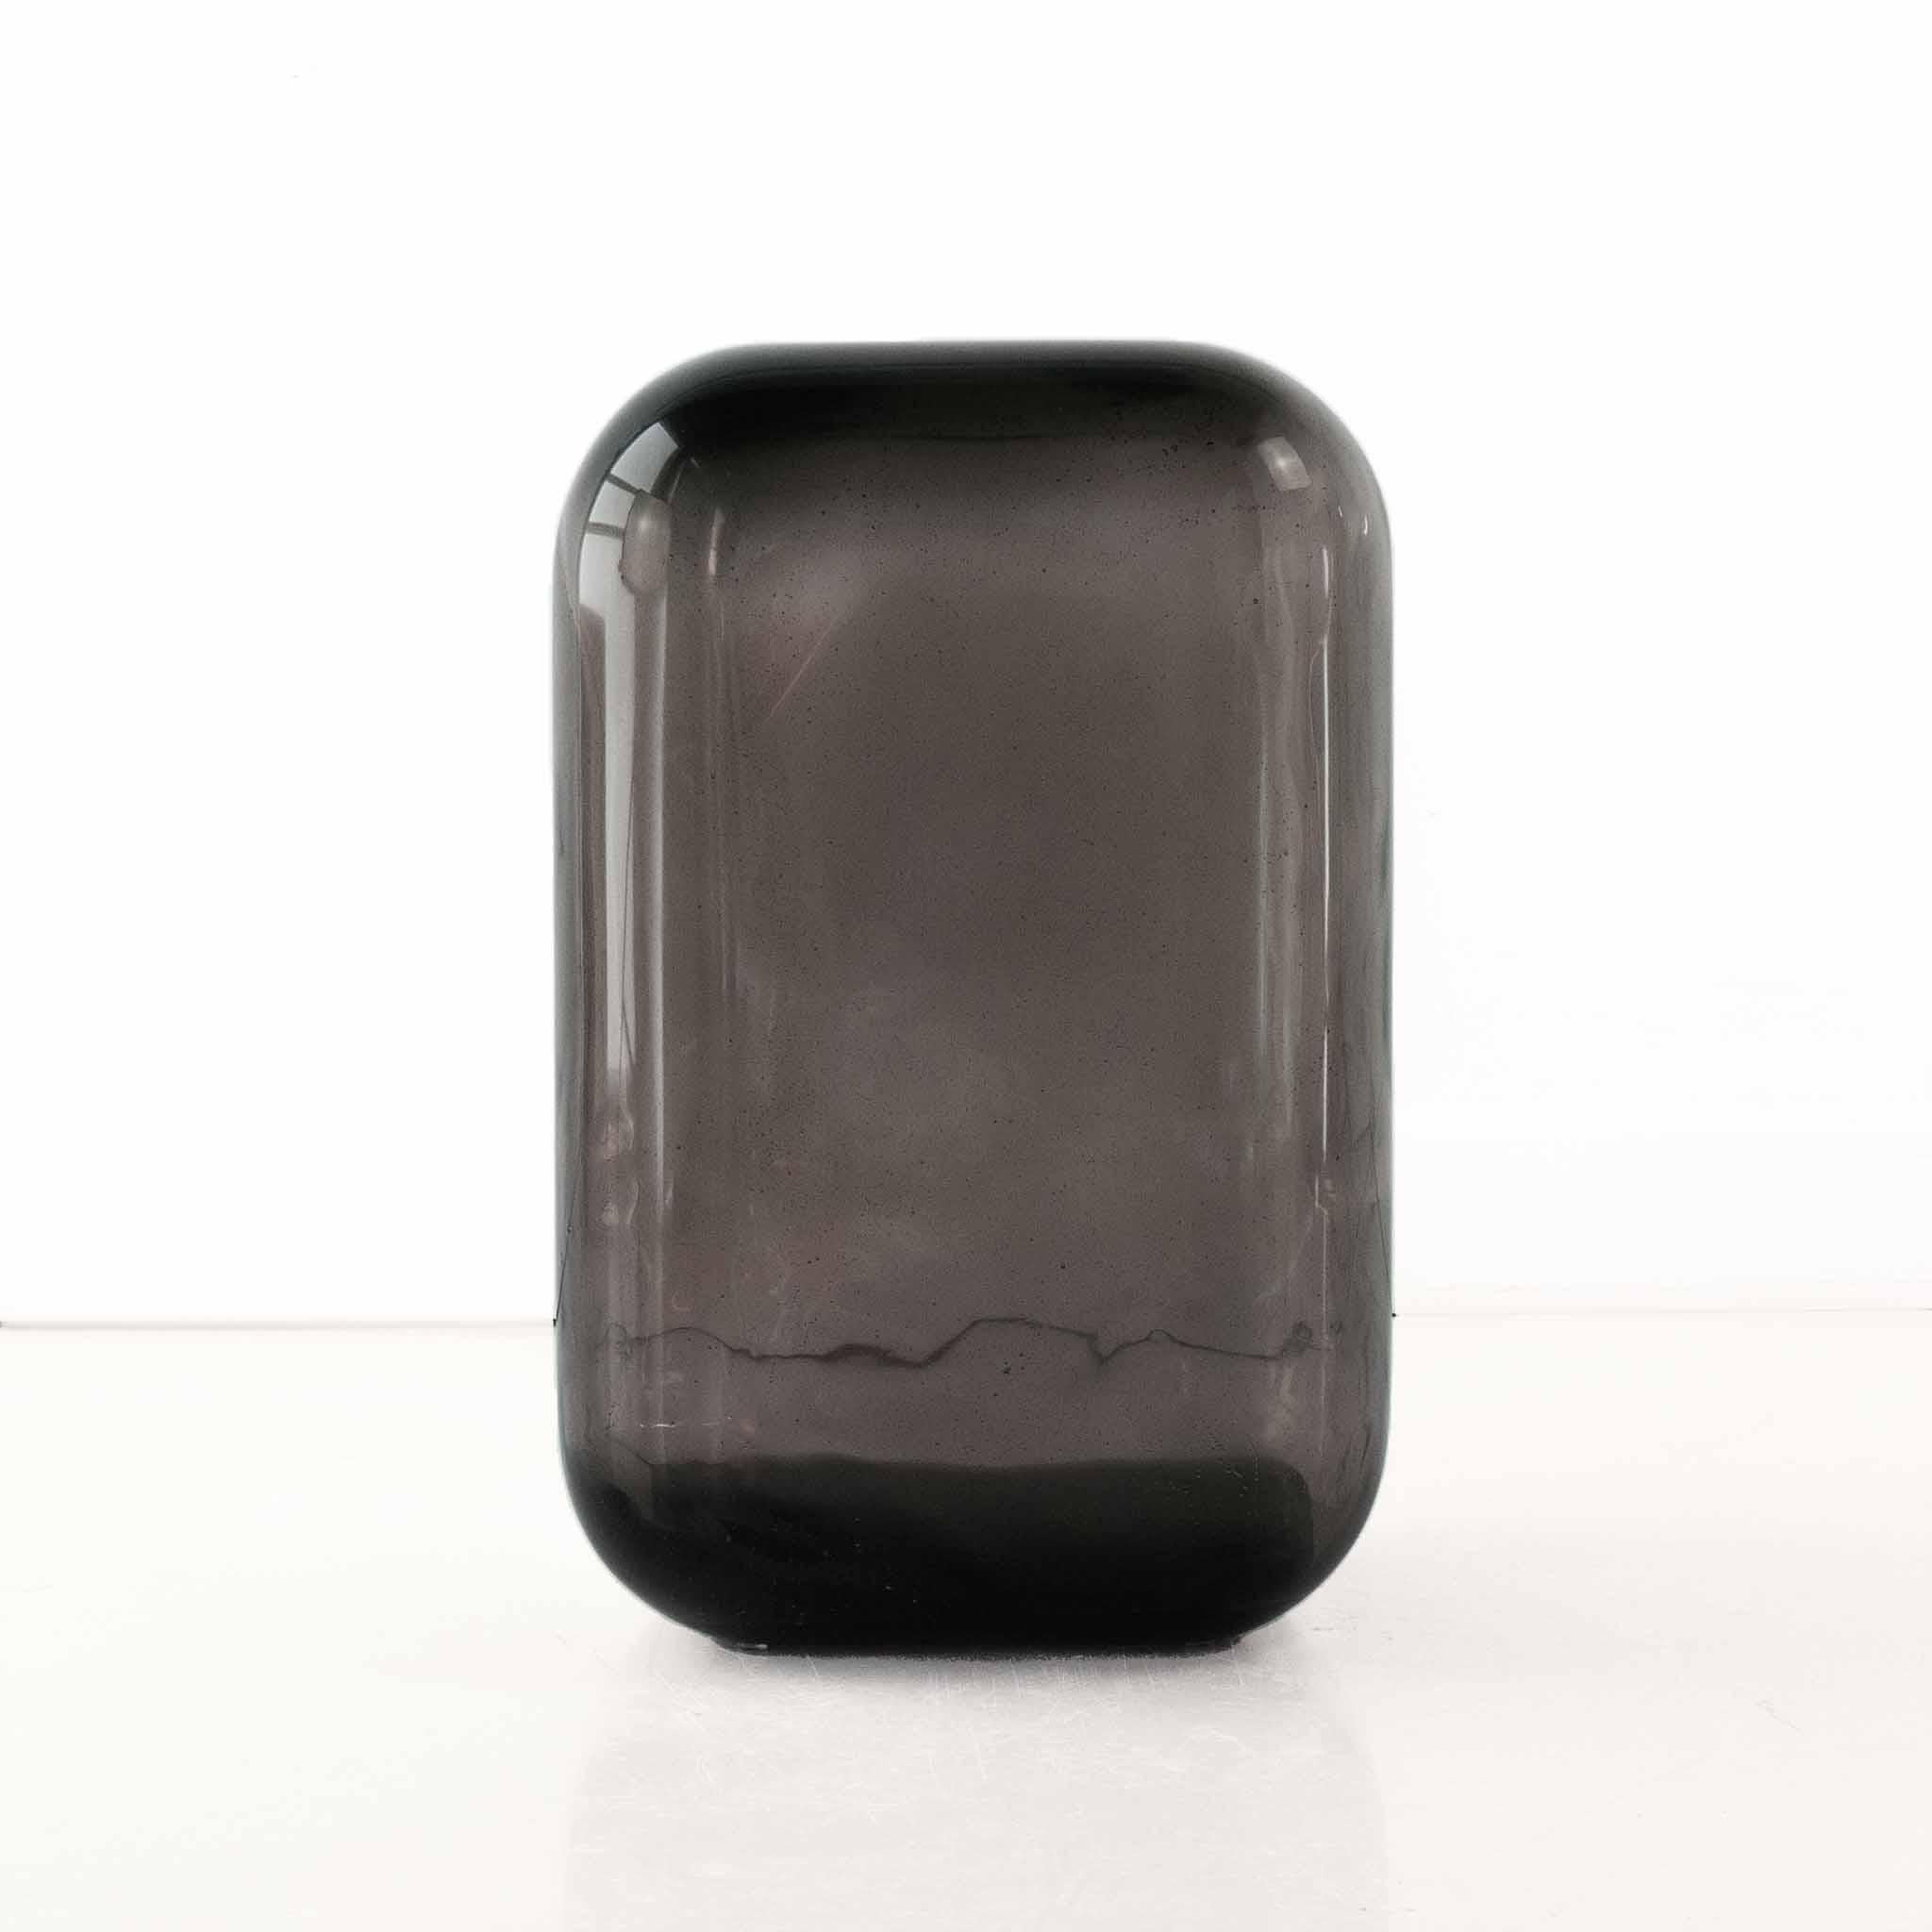 Rock Oort Resin Side Table by creators of objects.
Materials: Resin, pigment
DImensions: W 36 x D 36 x H 56 cm
Also Available: Tourmaline, Bordeaux, Spice, Ochre, Forest, Ocean, Twilight, Rock, Lilac, Cerise, Coral Spice, Honey, Moss, Surf, Eve,